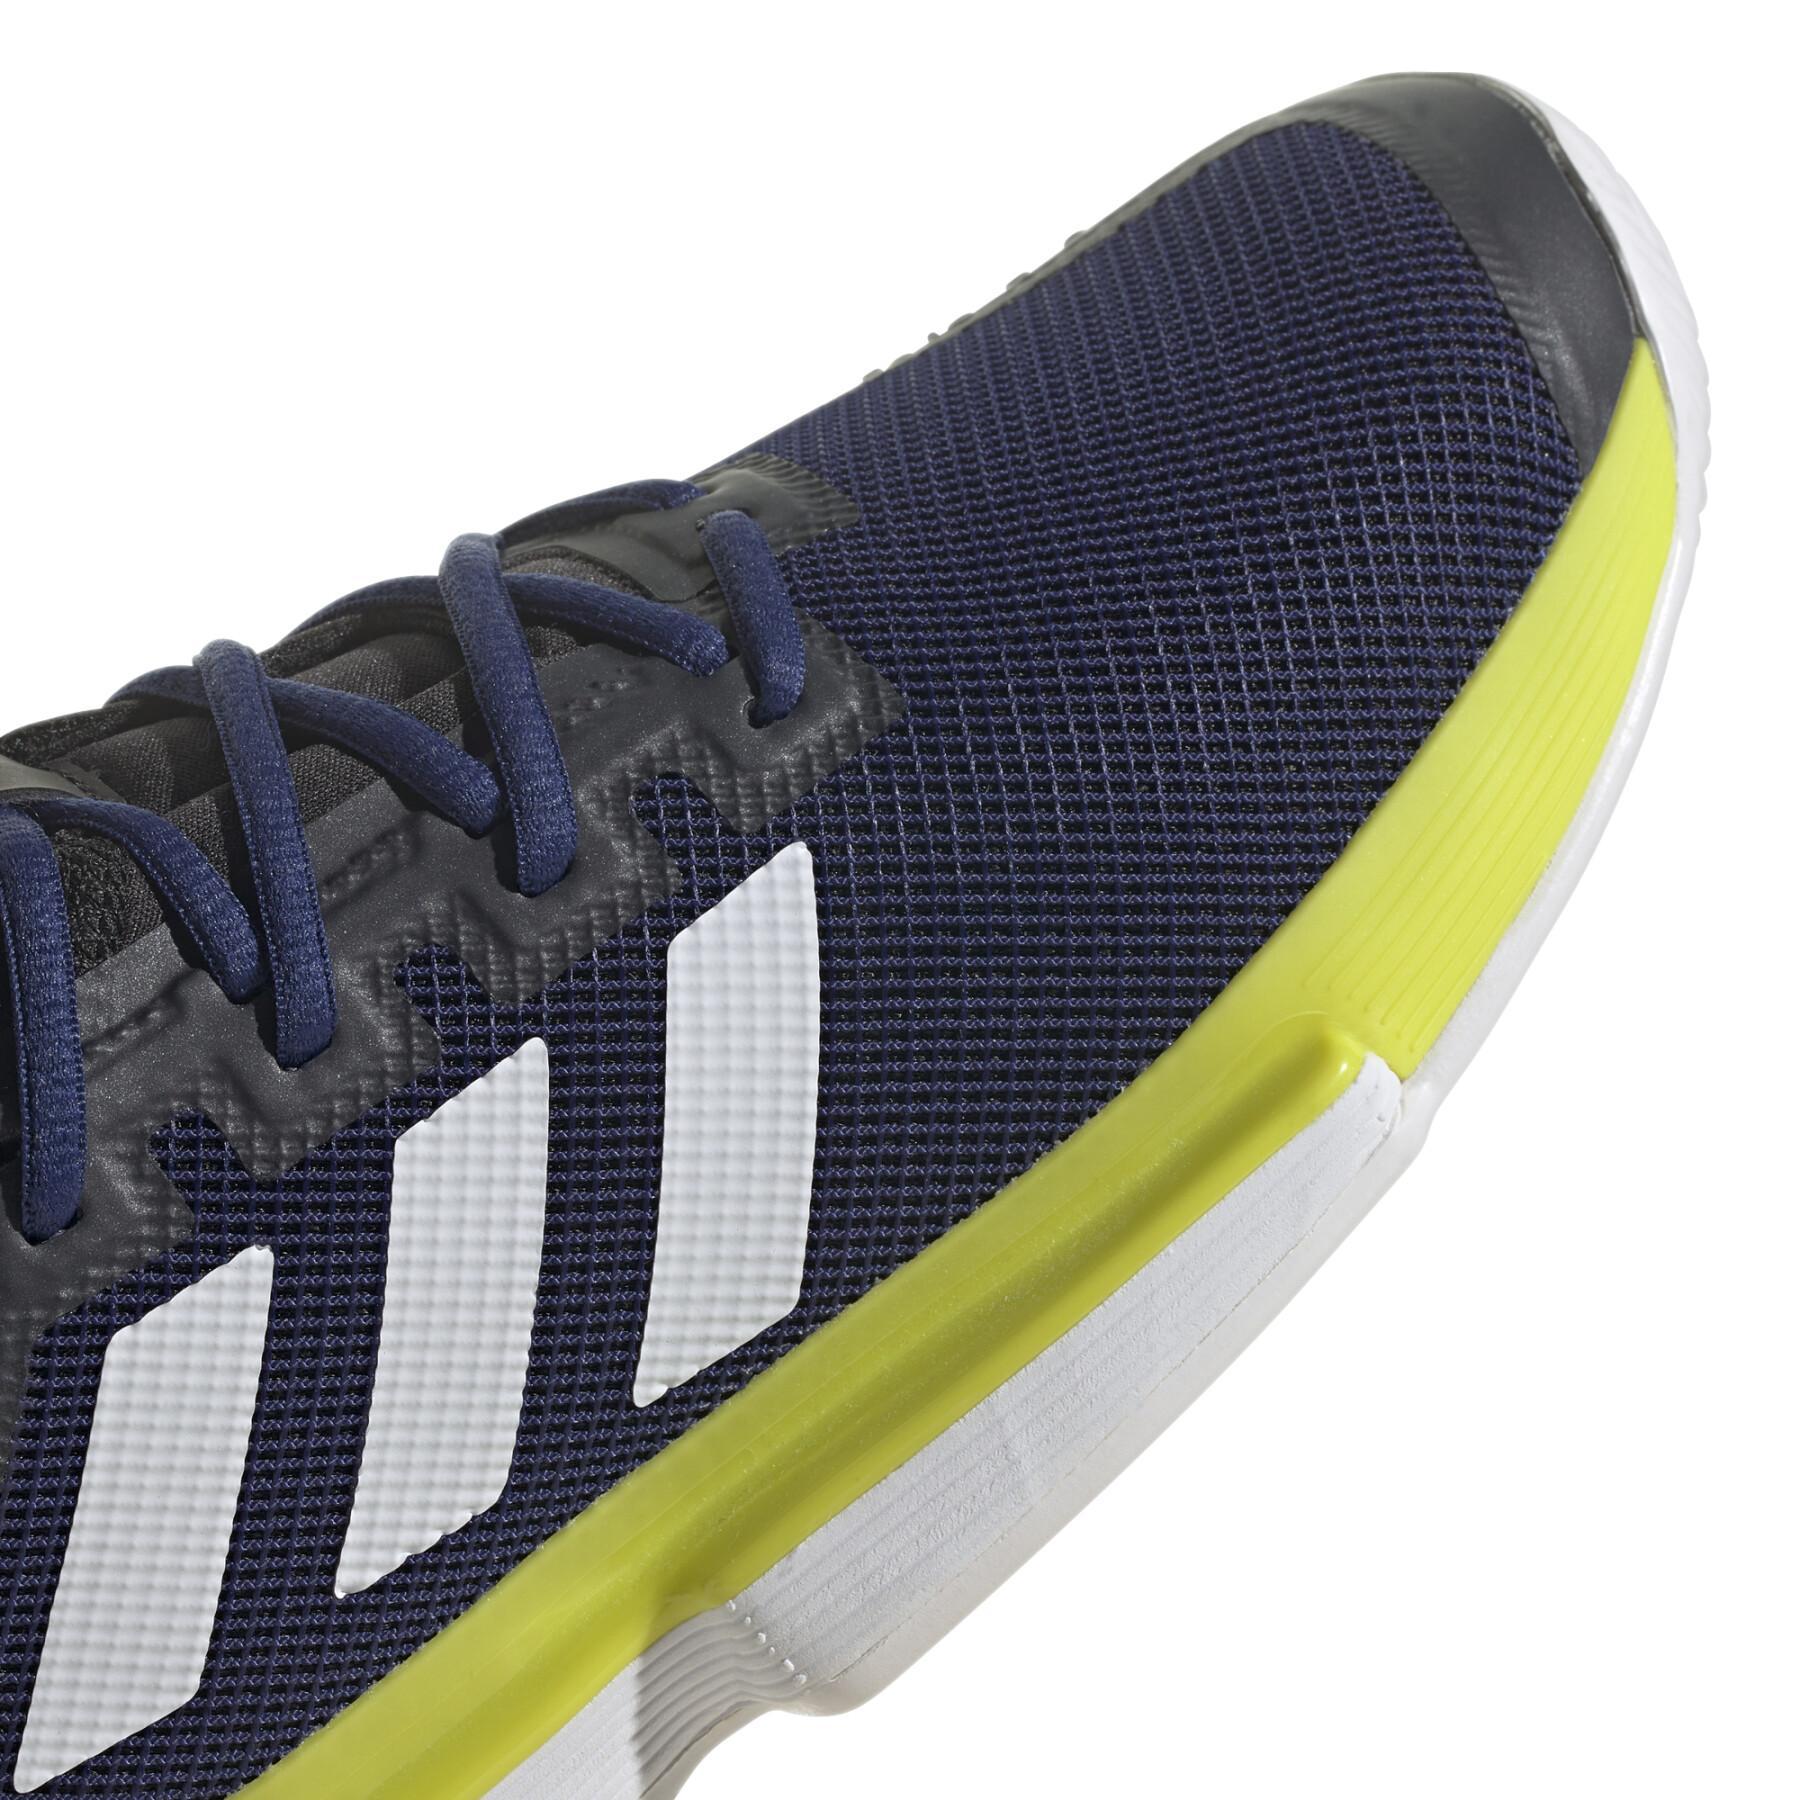 Zapatos adidas SoleMatch Bounce M